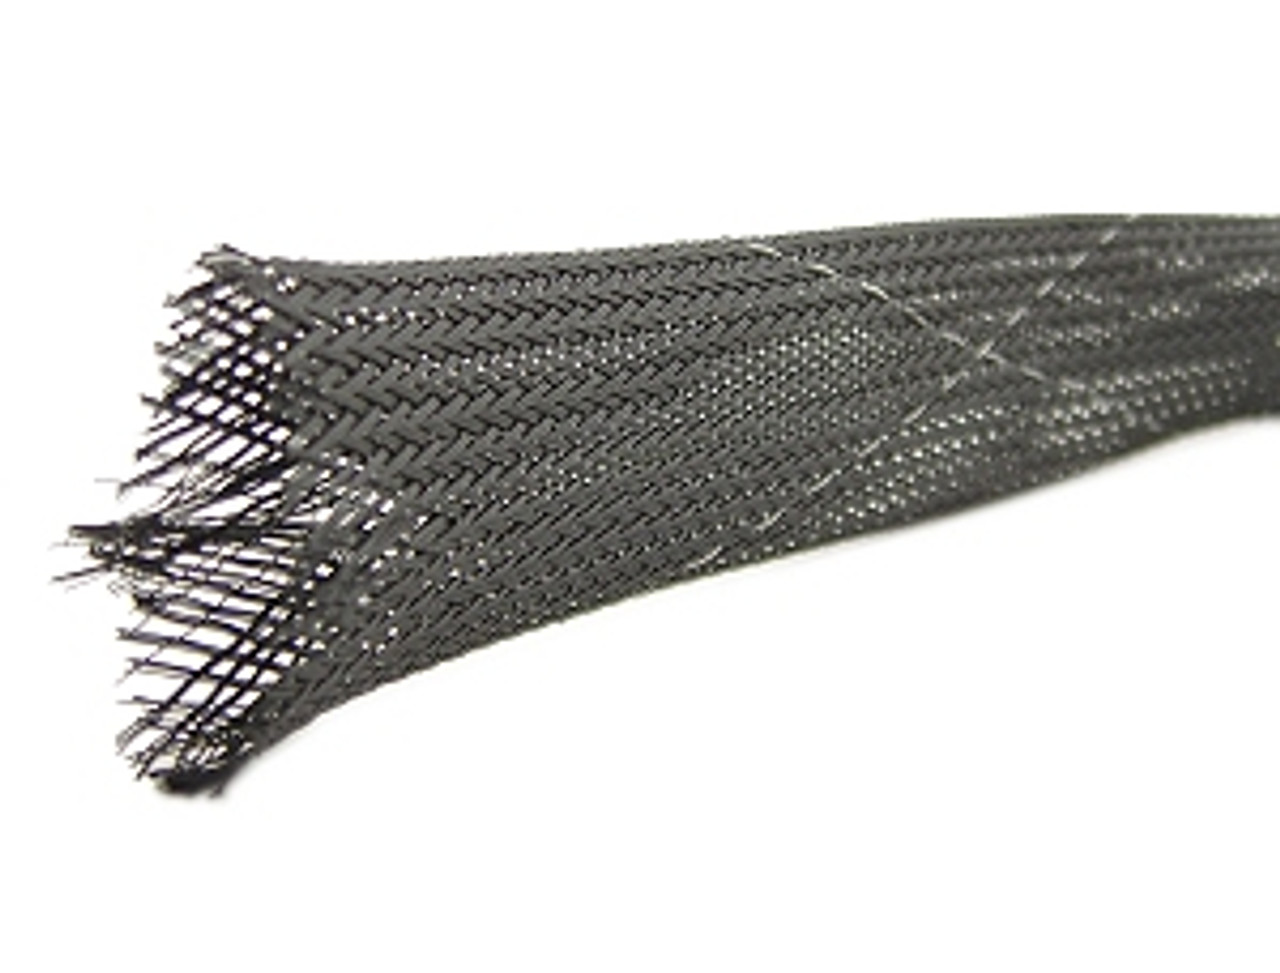 https://cdn11.bigcommerce.com/s-1lji4r5cj2/images/stencil/1280x1280/products/2603/2322/Expando-Expandable-Braided-Sleeving-1-1-4-Inch-250-Foot.__S_1__54834.1602273895.jpg?c=1